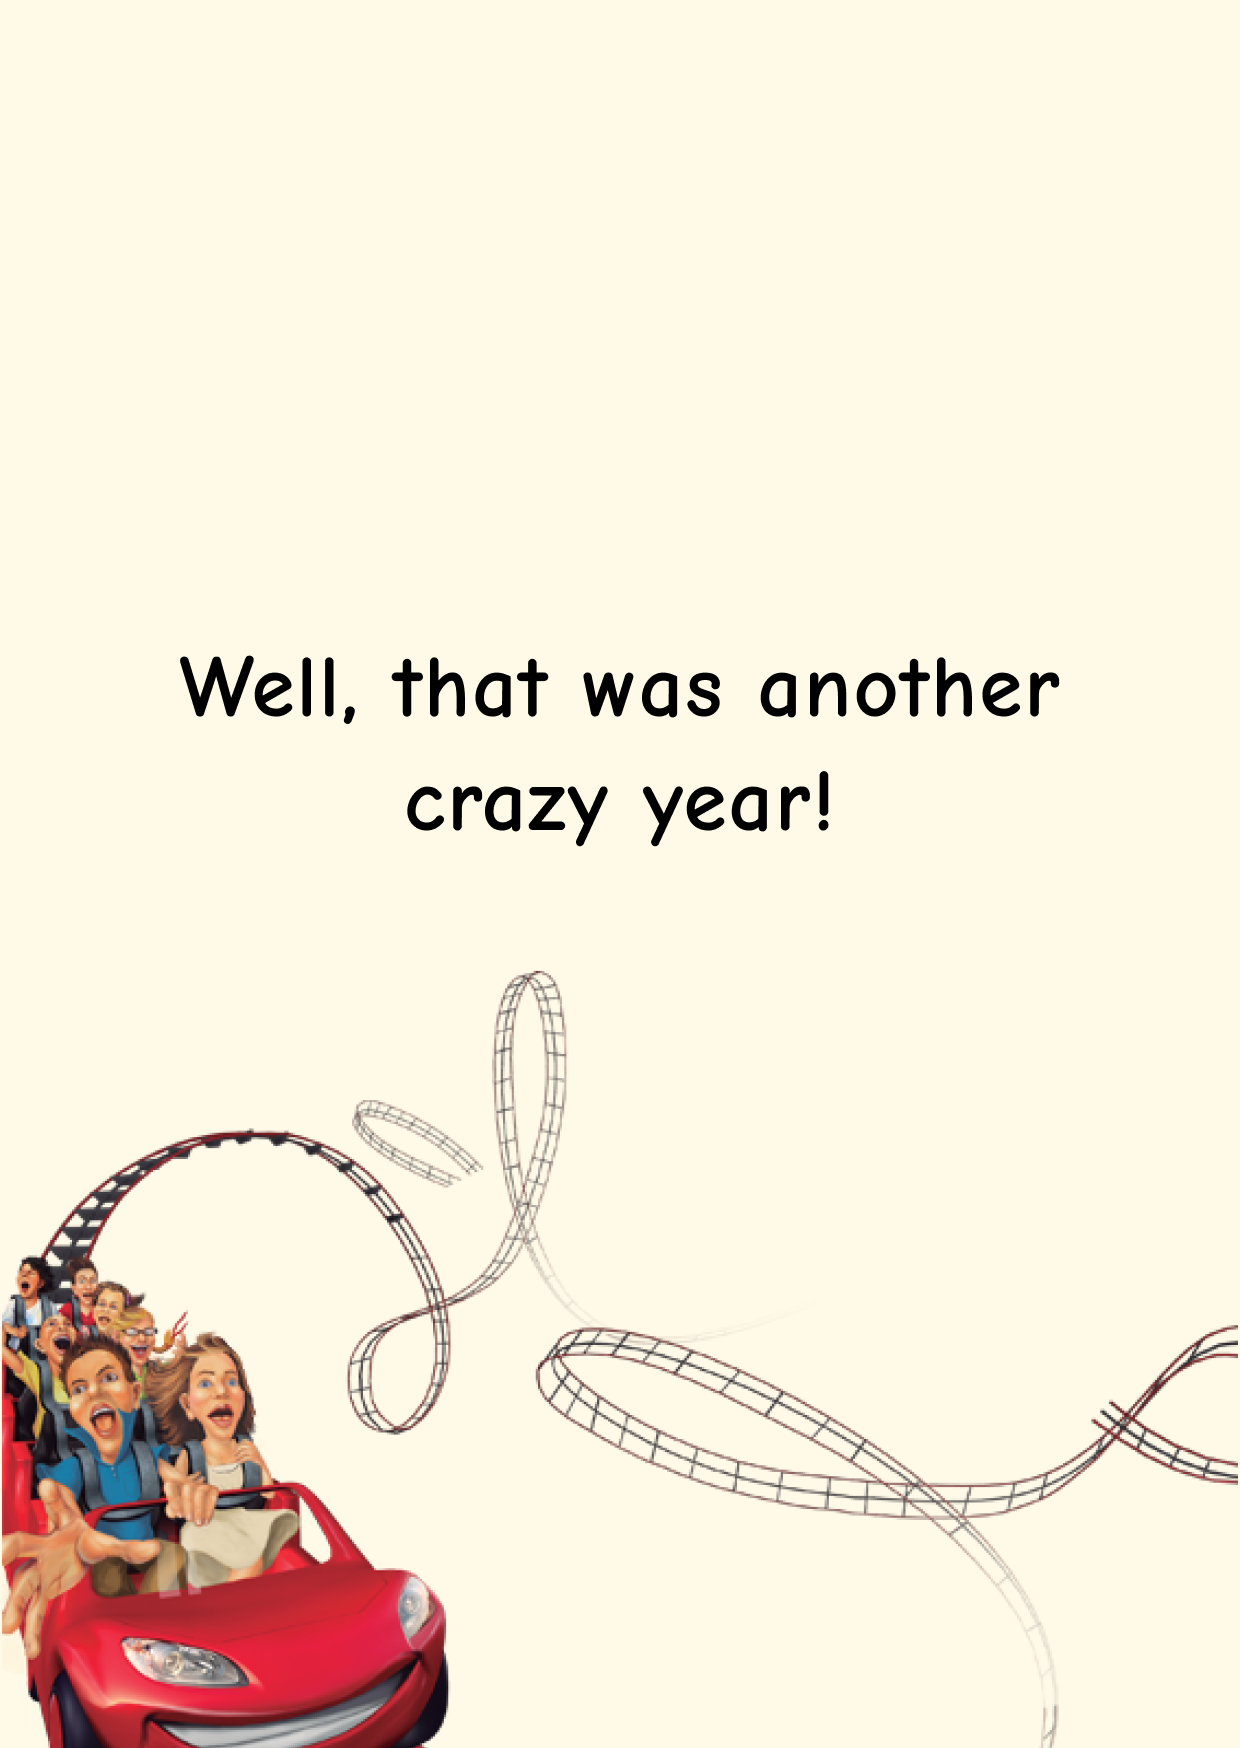 Free Christmas Postcard: That Was Another Crazy Year pinterest image.